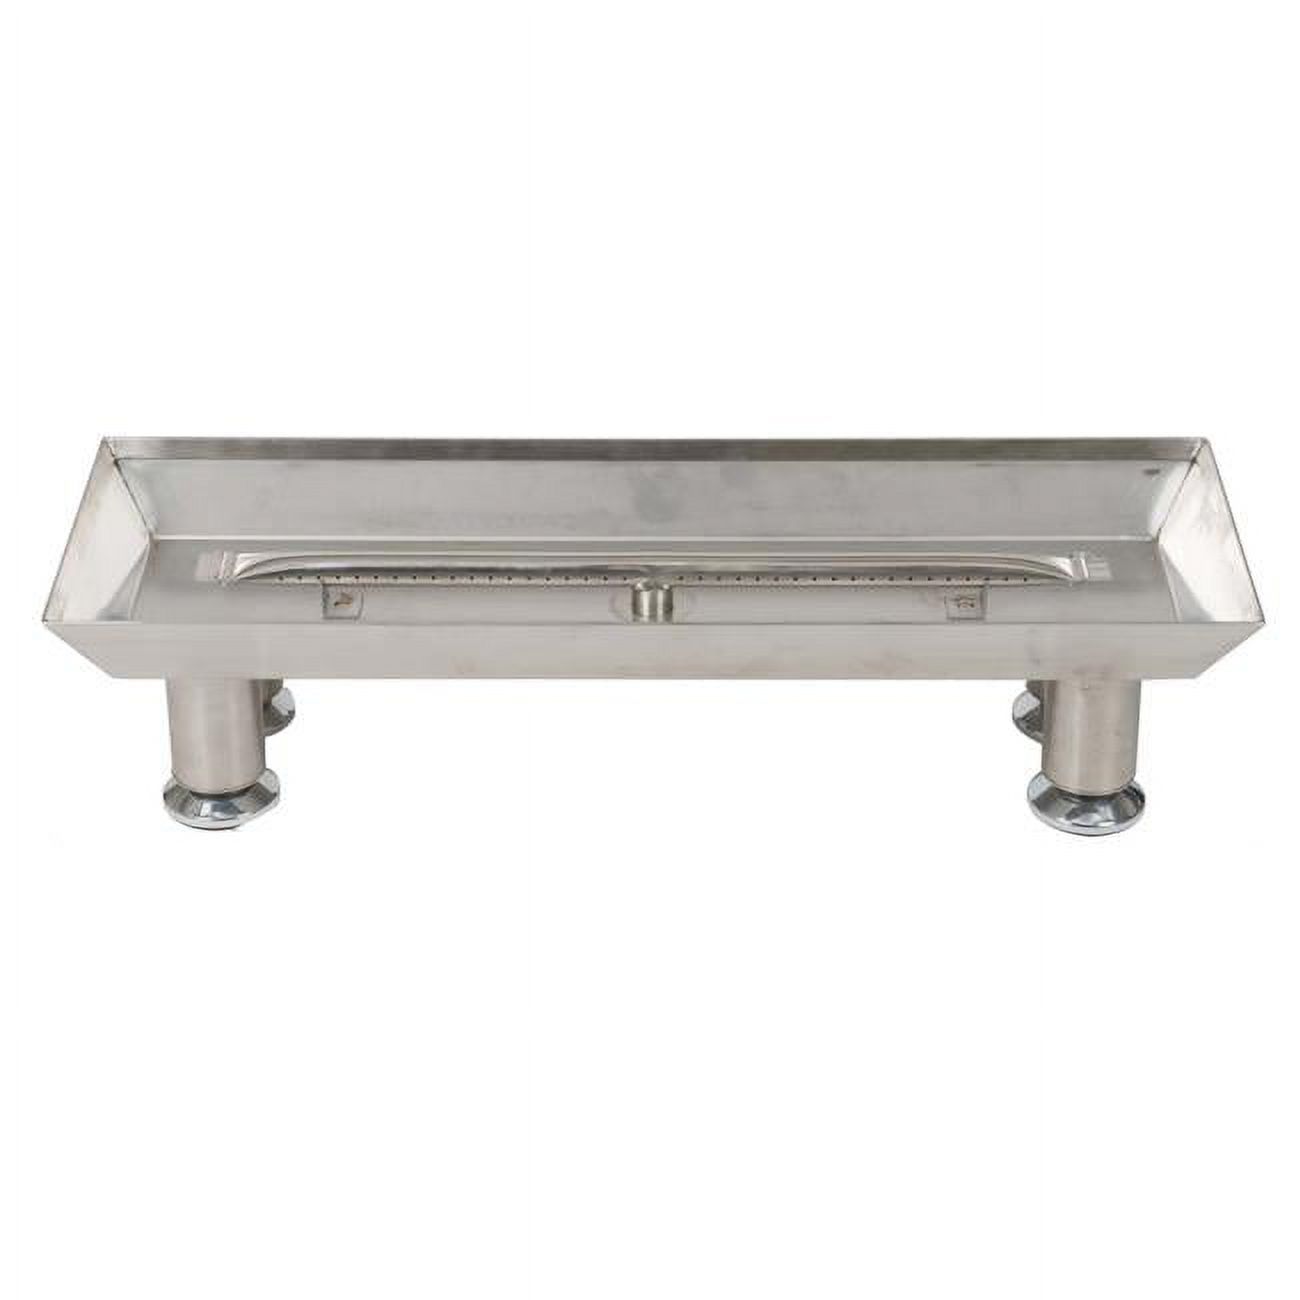 Dagan LBPS-24 Burner Pan with Straight Burner, Stainless Steel - image 1 of 1